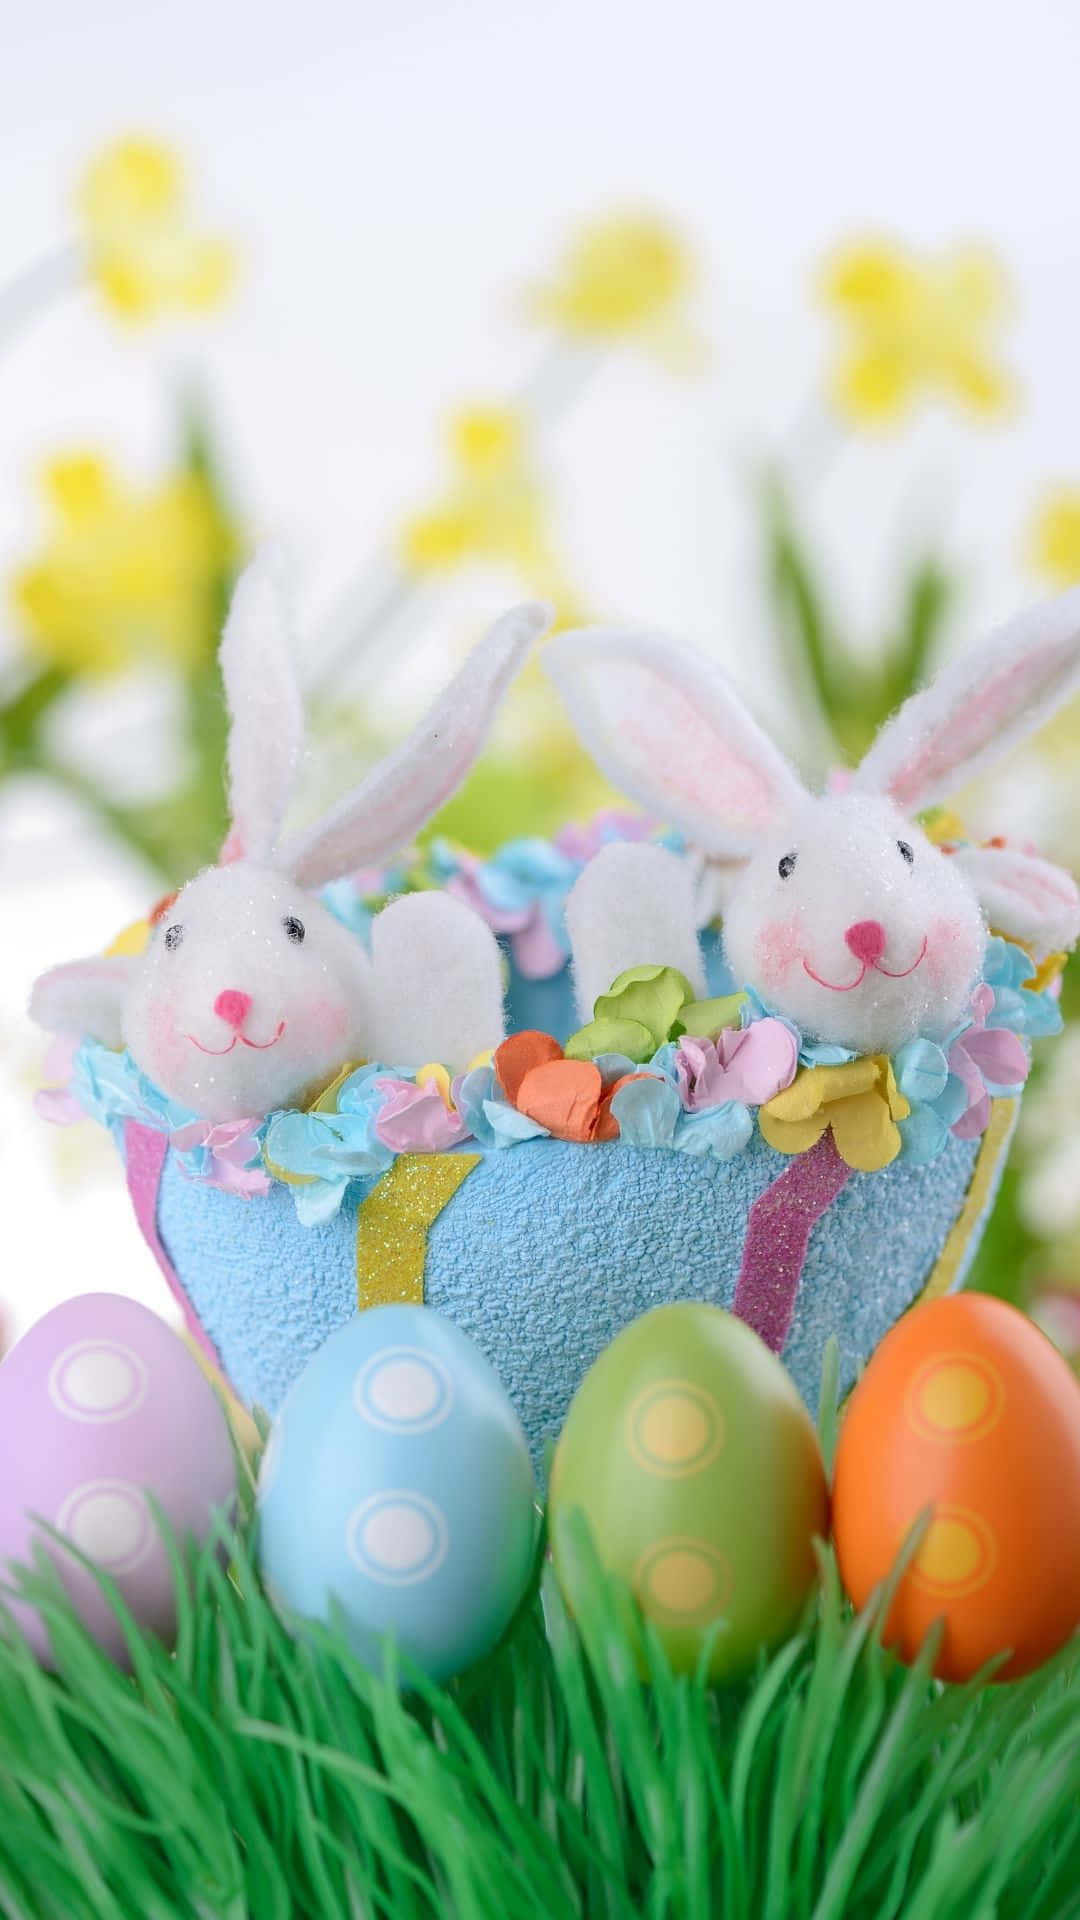 The Easter Bunny Bringing A Basket Of Flowers And Chocolate Eggs For You. Background